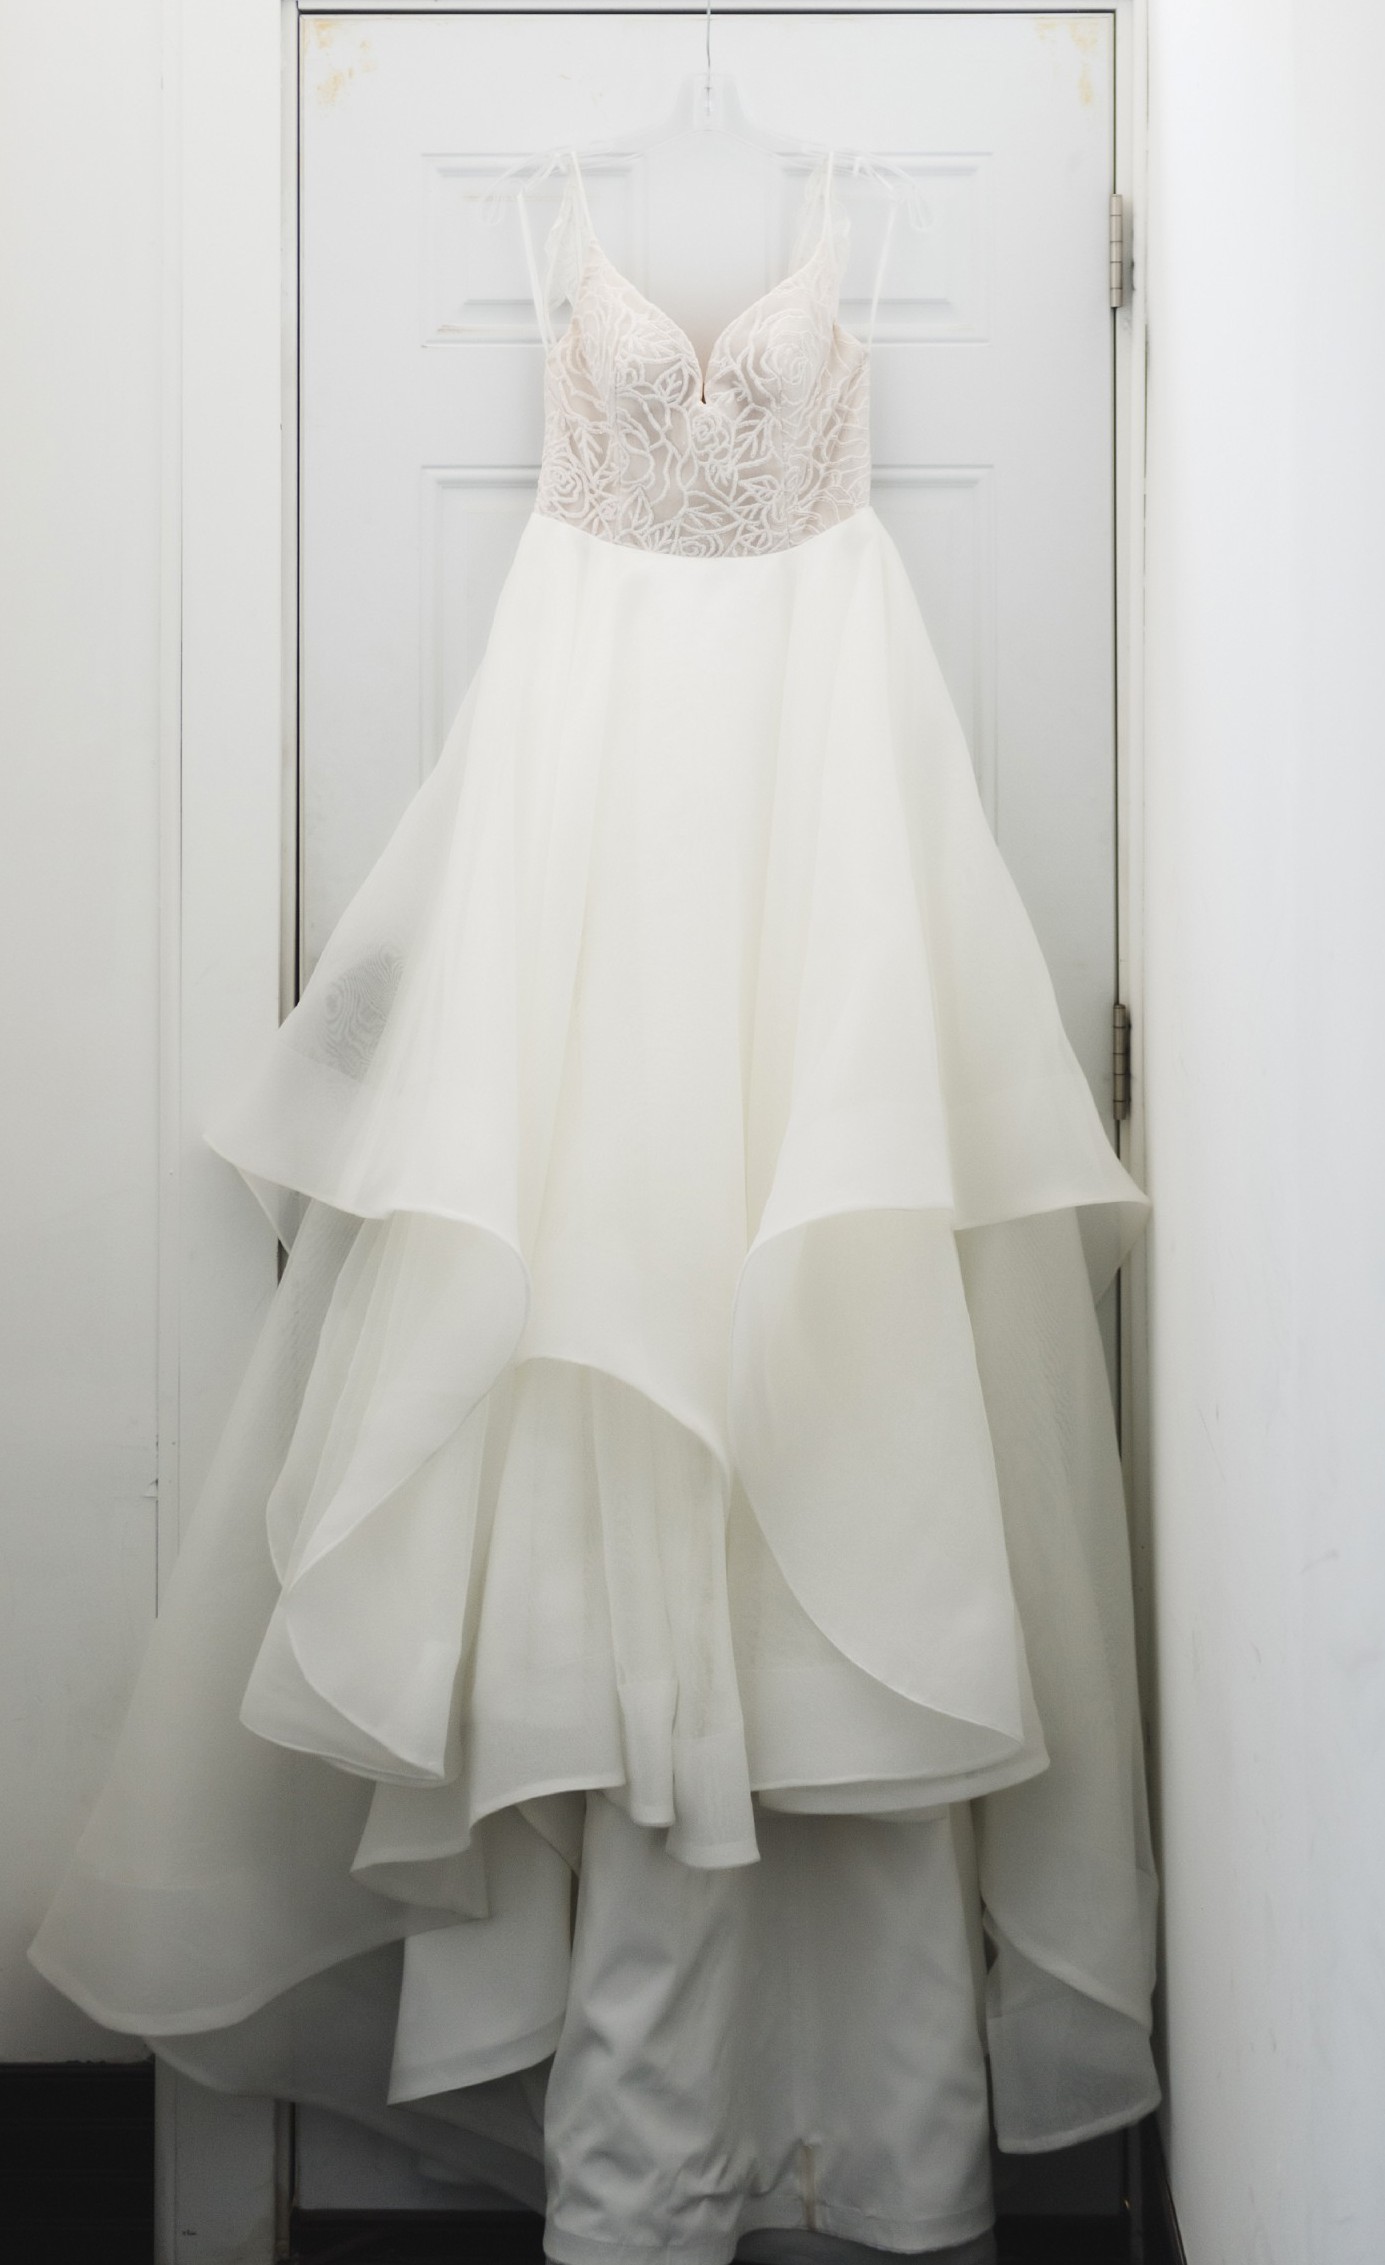 Blush by Hayley Paige Perri Gown Style 1853 Preowned Wedding Dress Save 46%  - Stillwhite